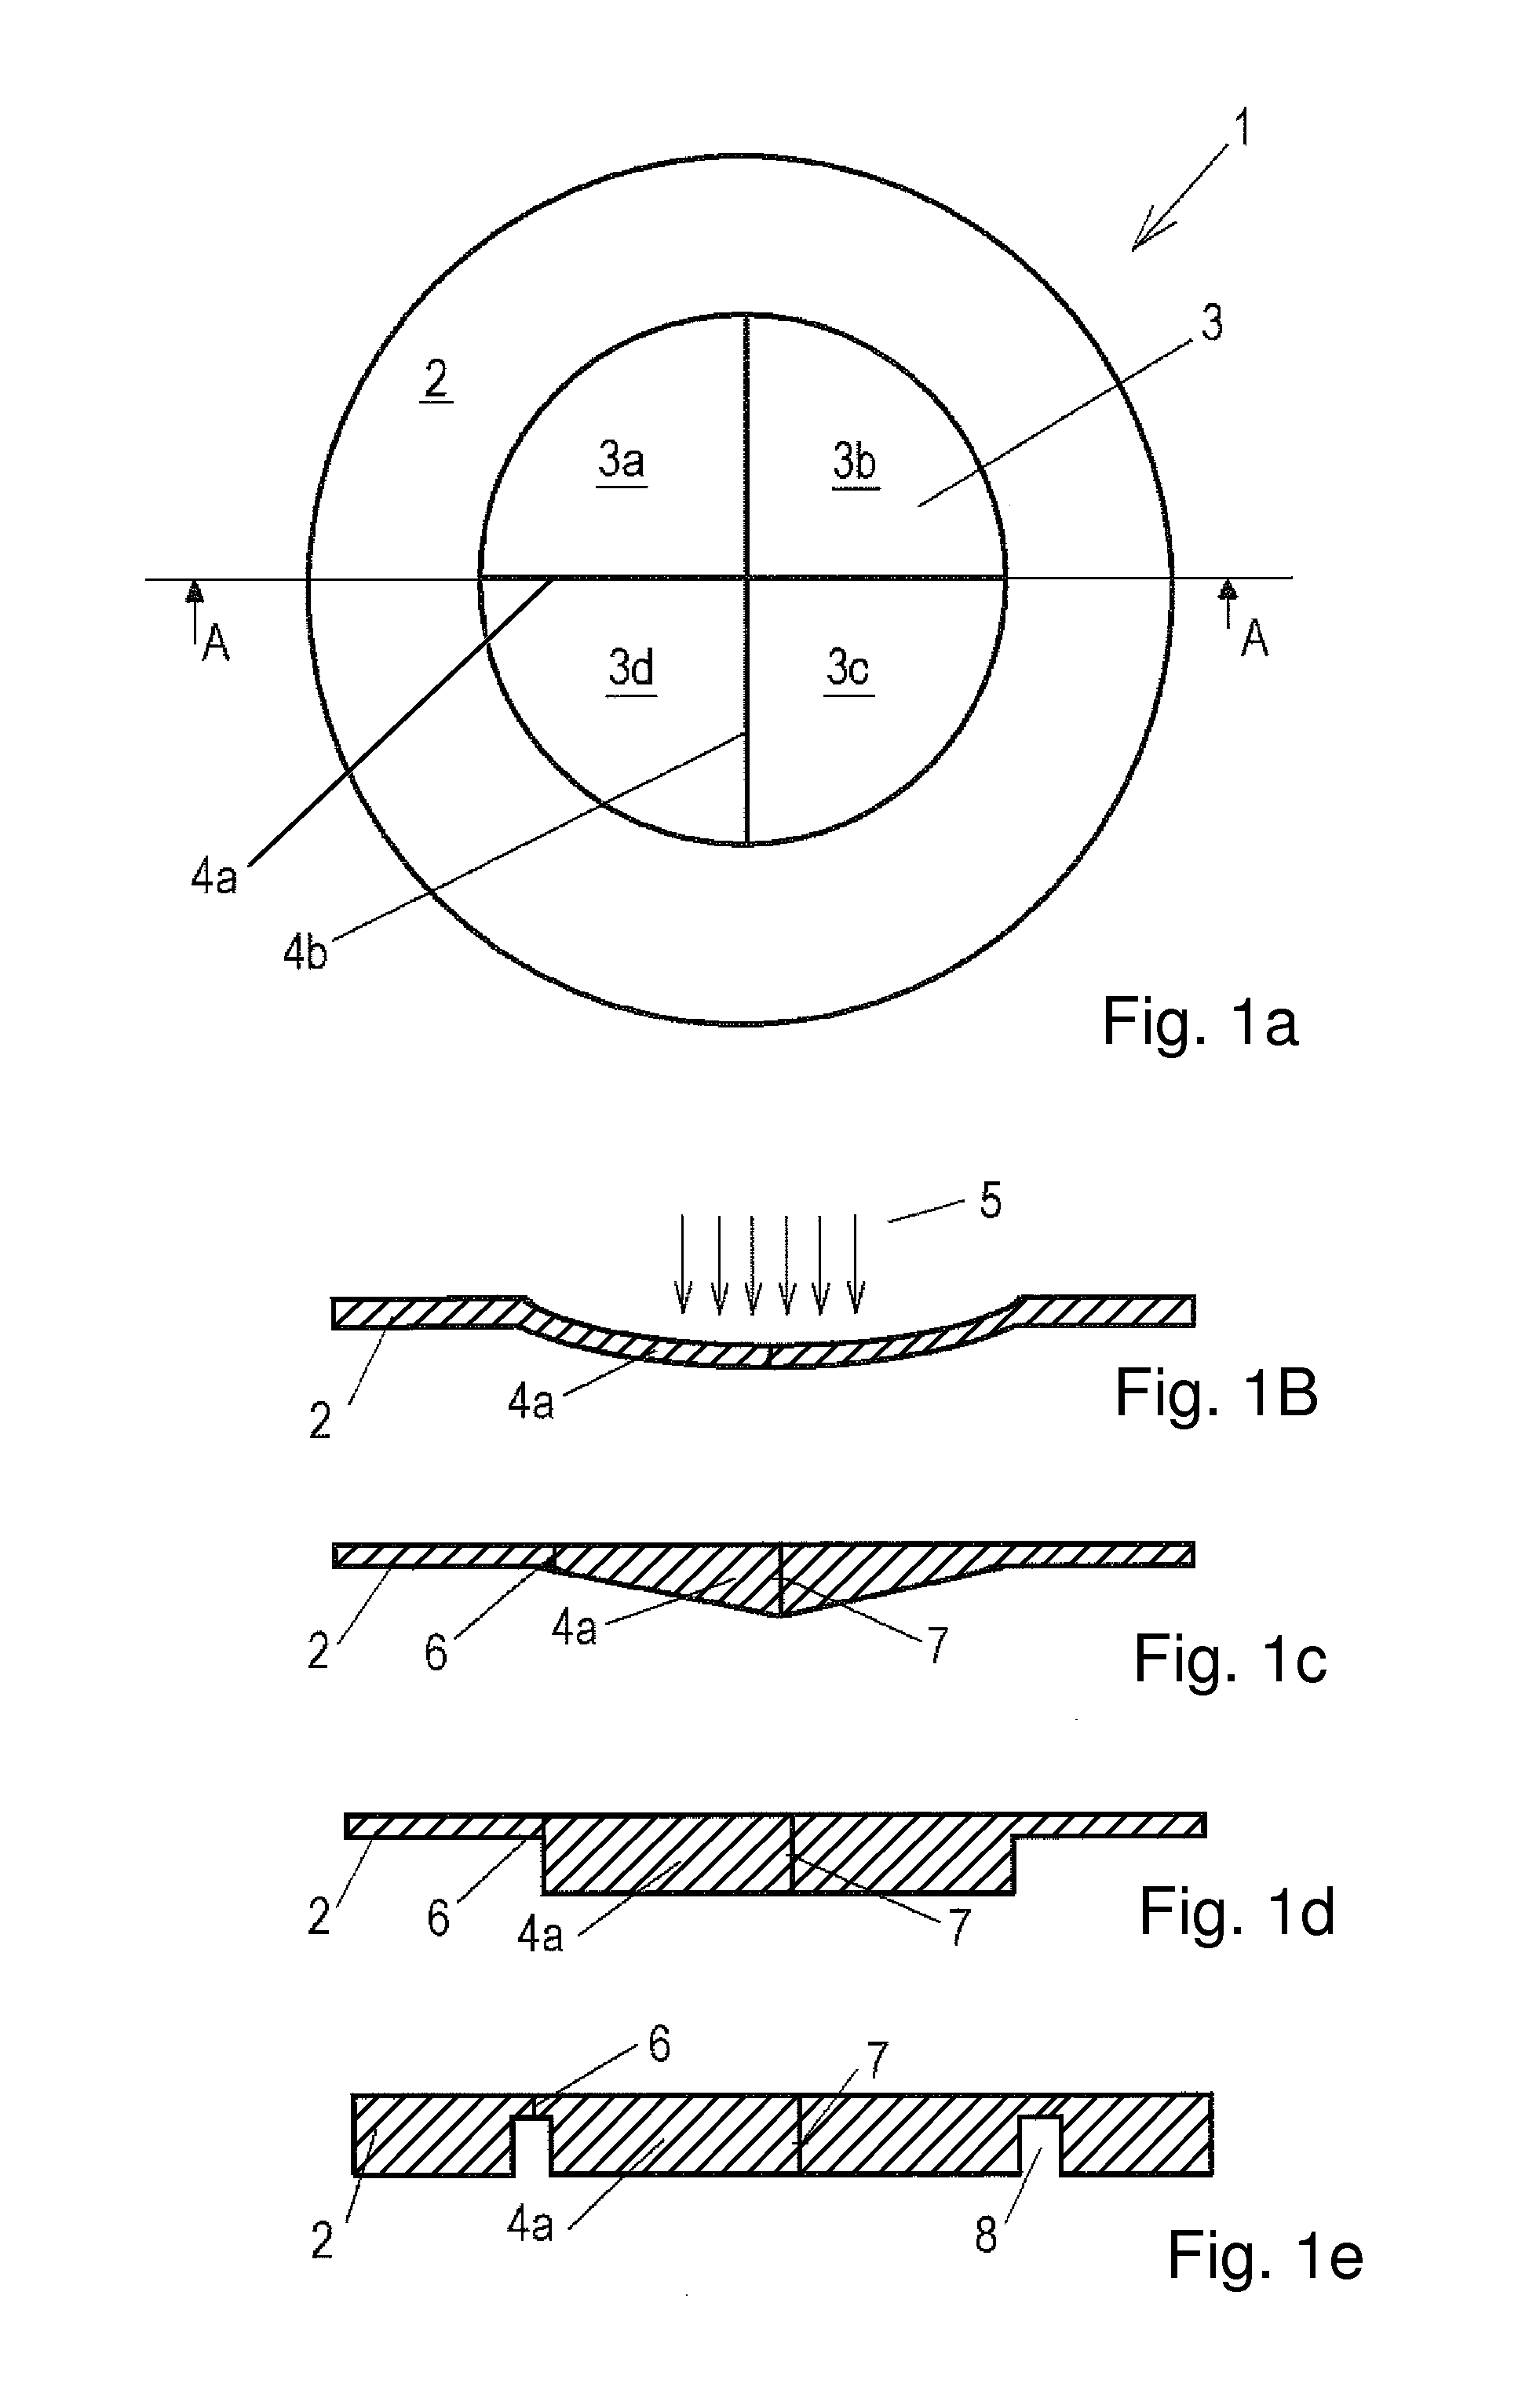 Slot valve for use in the pneumatic switching circuit of a respirator